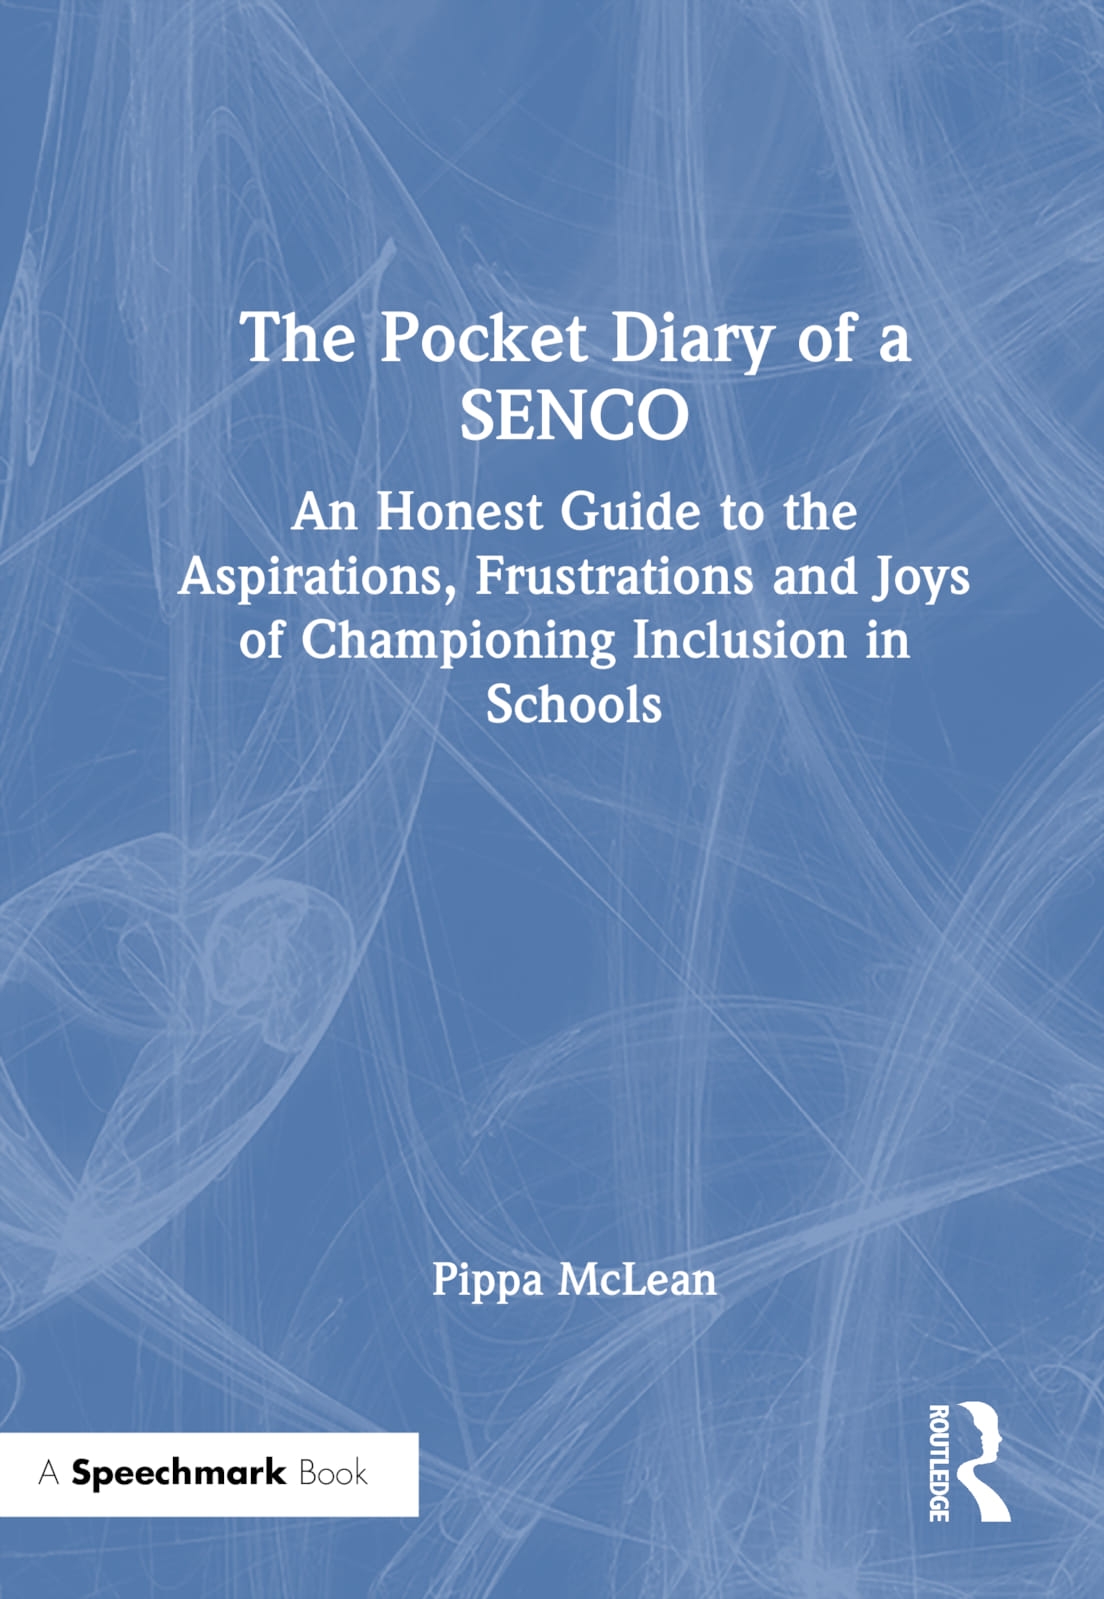 The Pocket Diary of a Senco: An Honest Guide to the Aspirations, Frustrations and Joy of Championing Inclusion in Schools